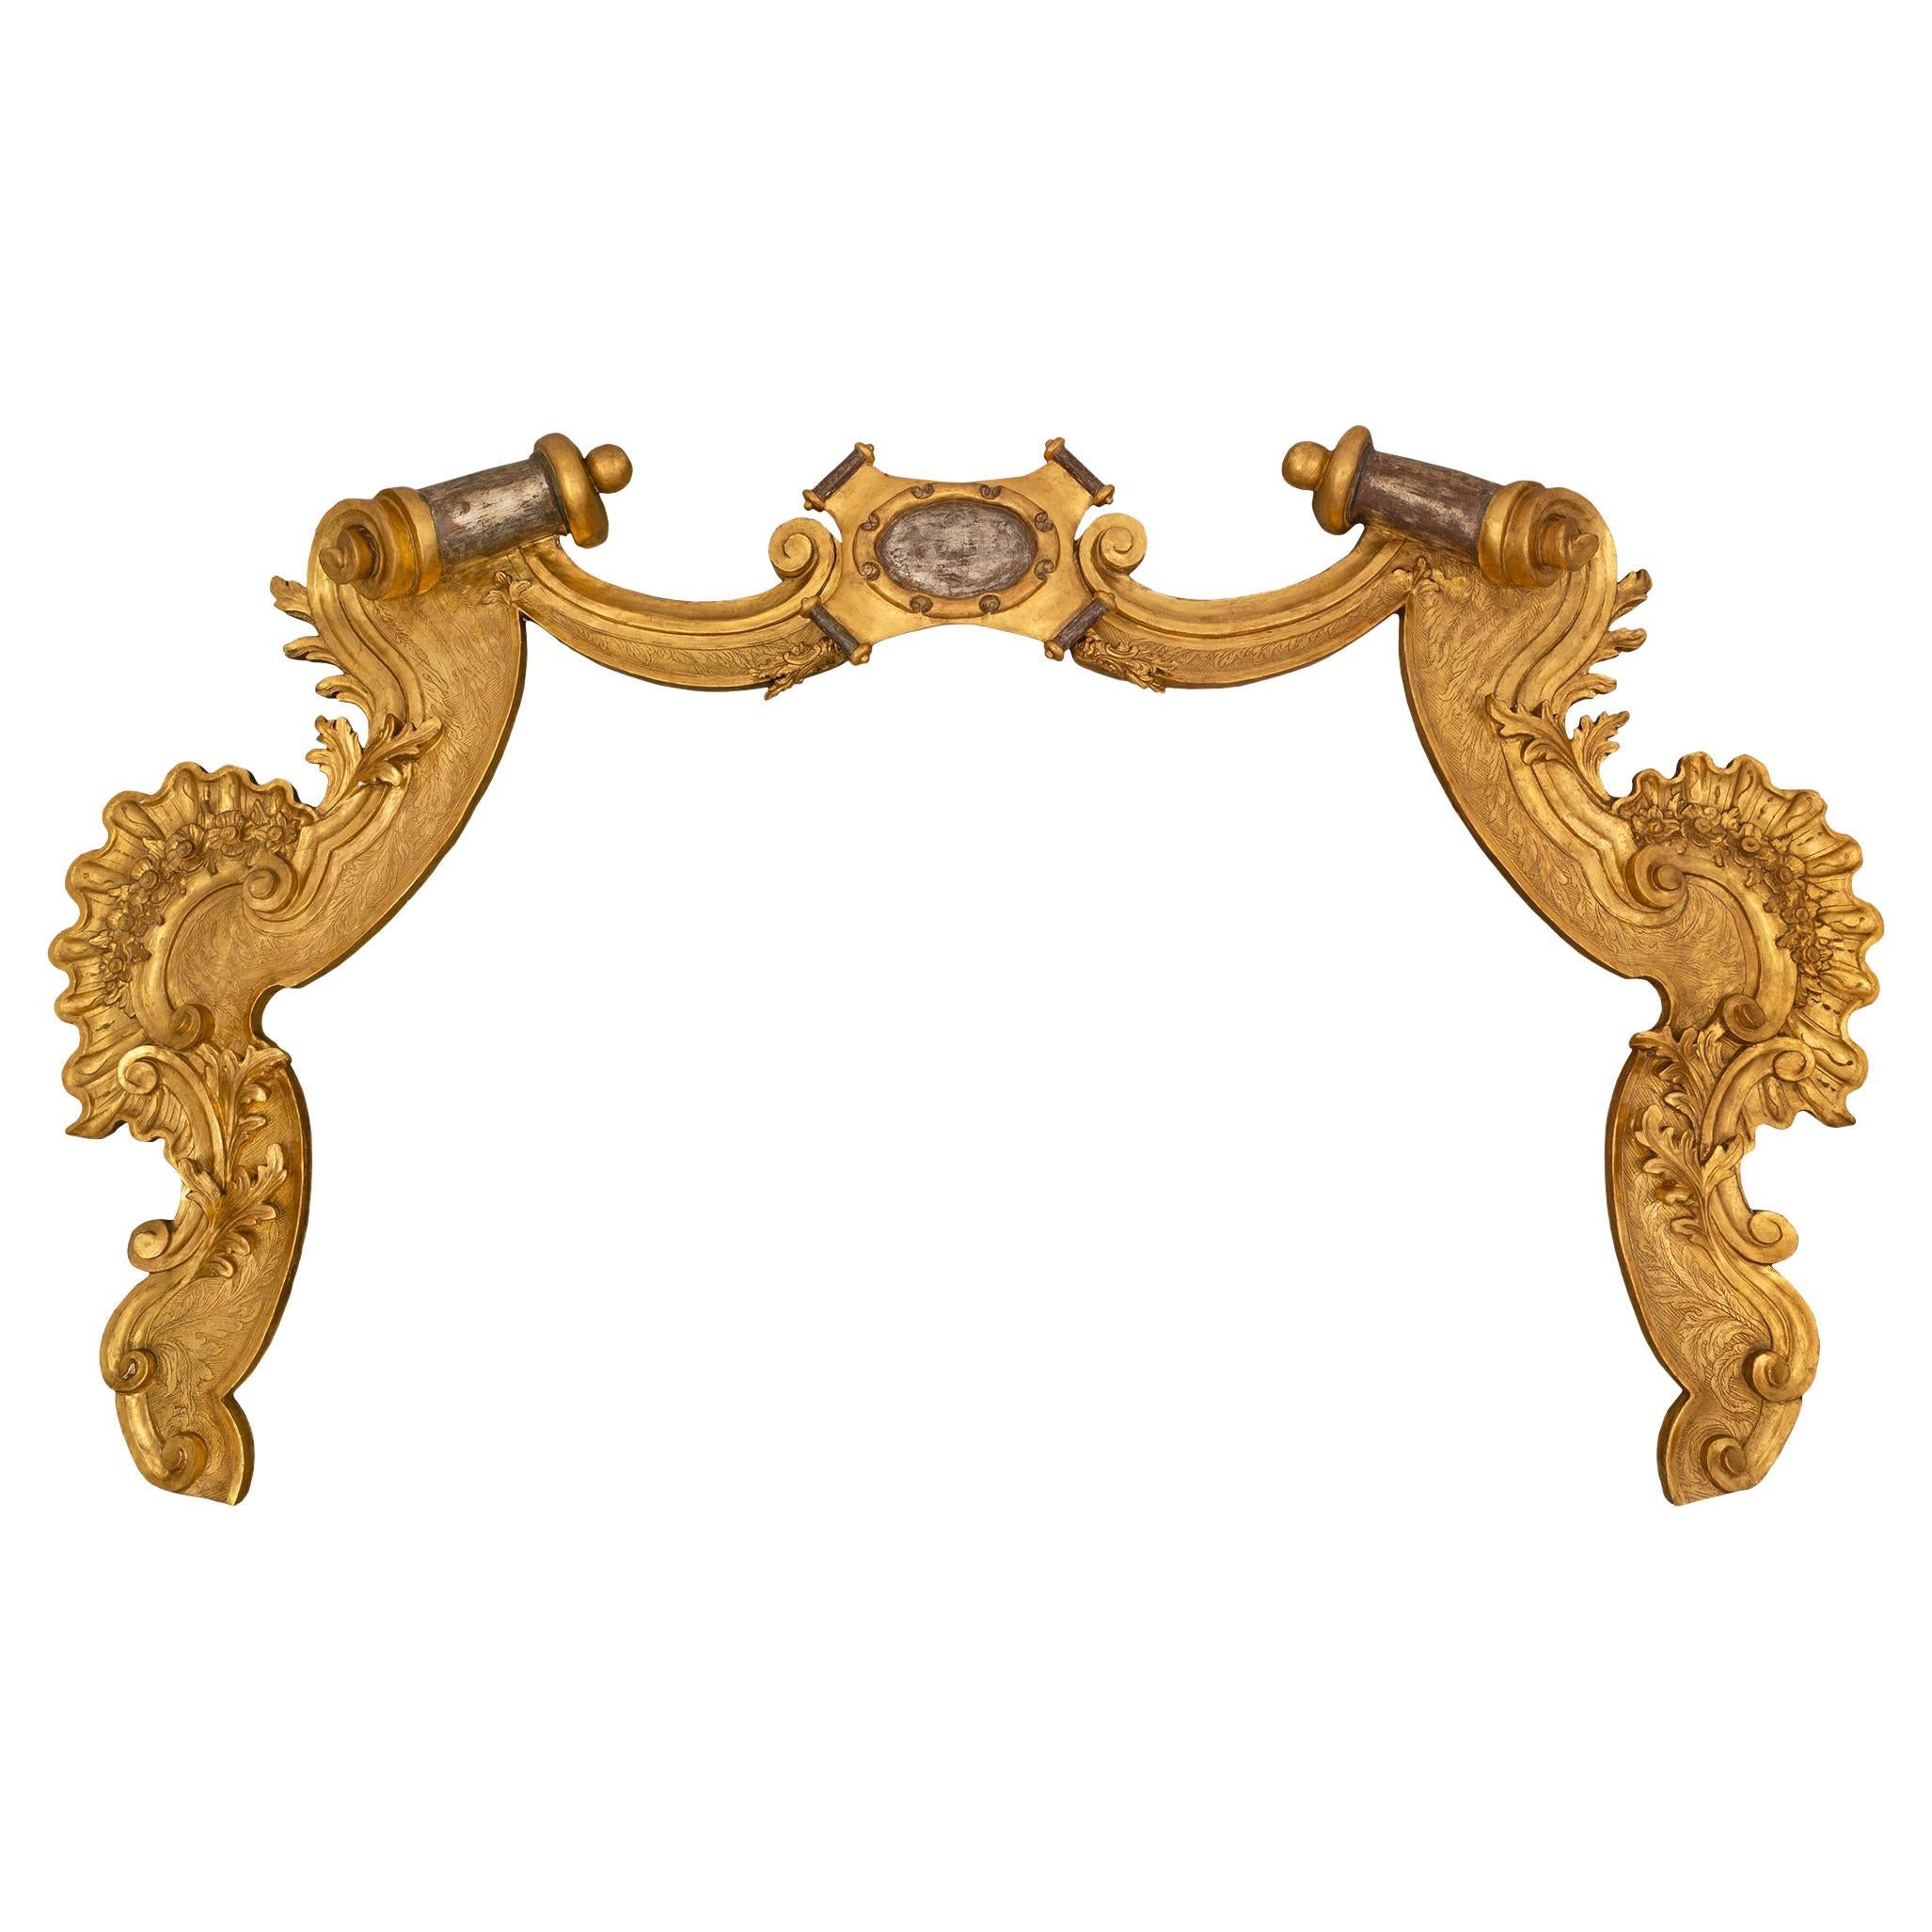 Italian 18th Century Giltwood and Mecca Architectural Element For Sale